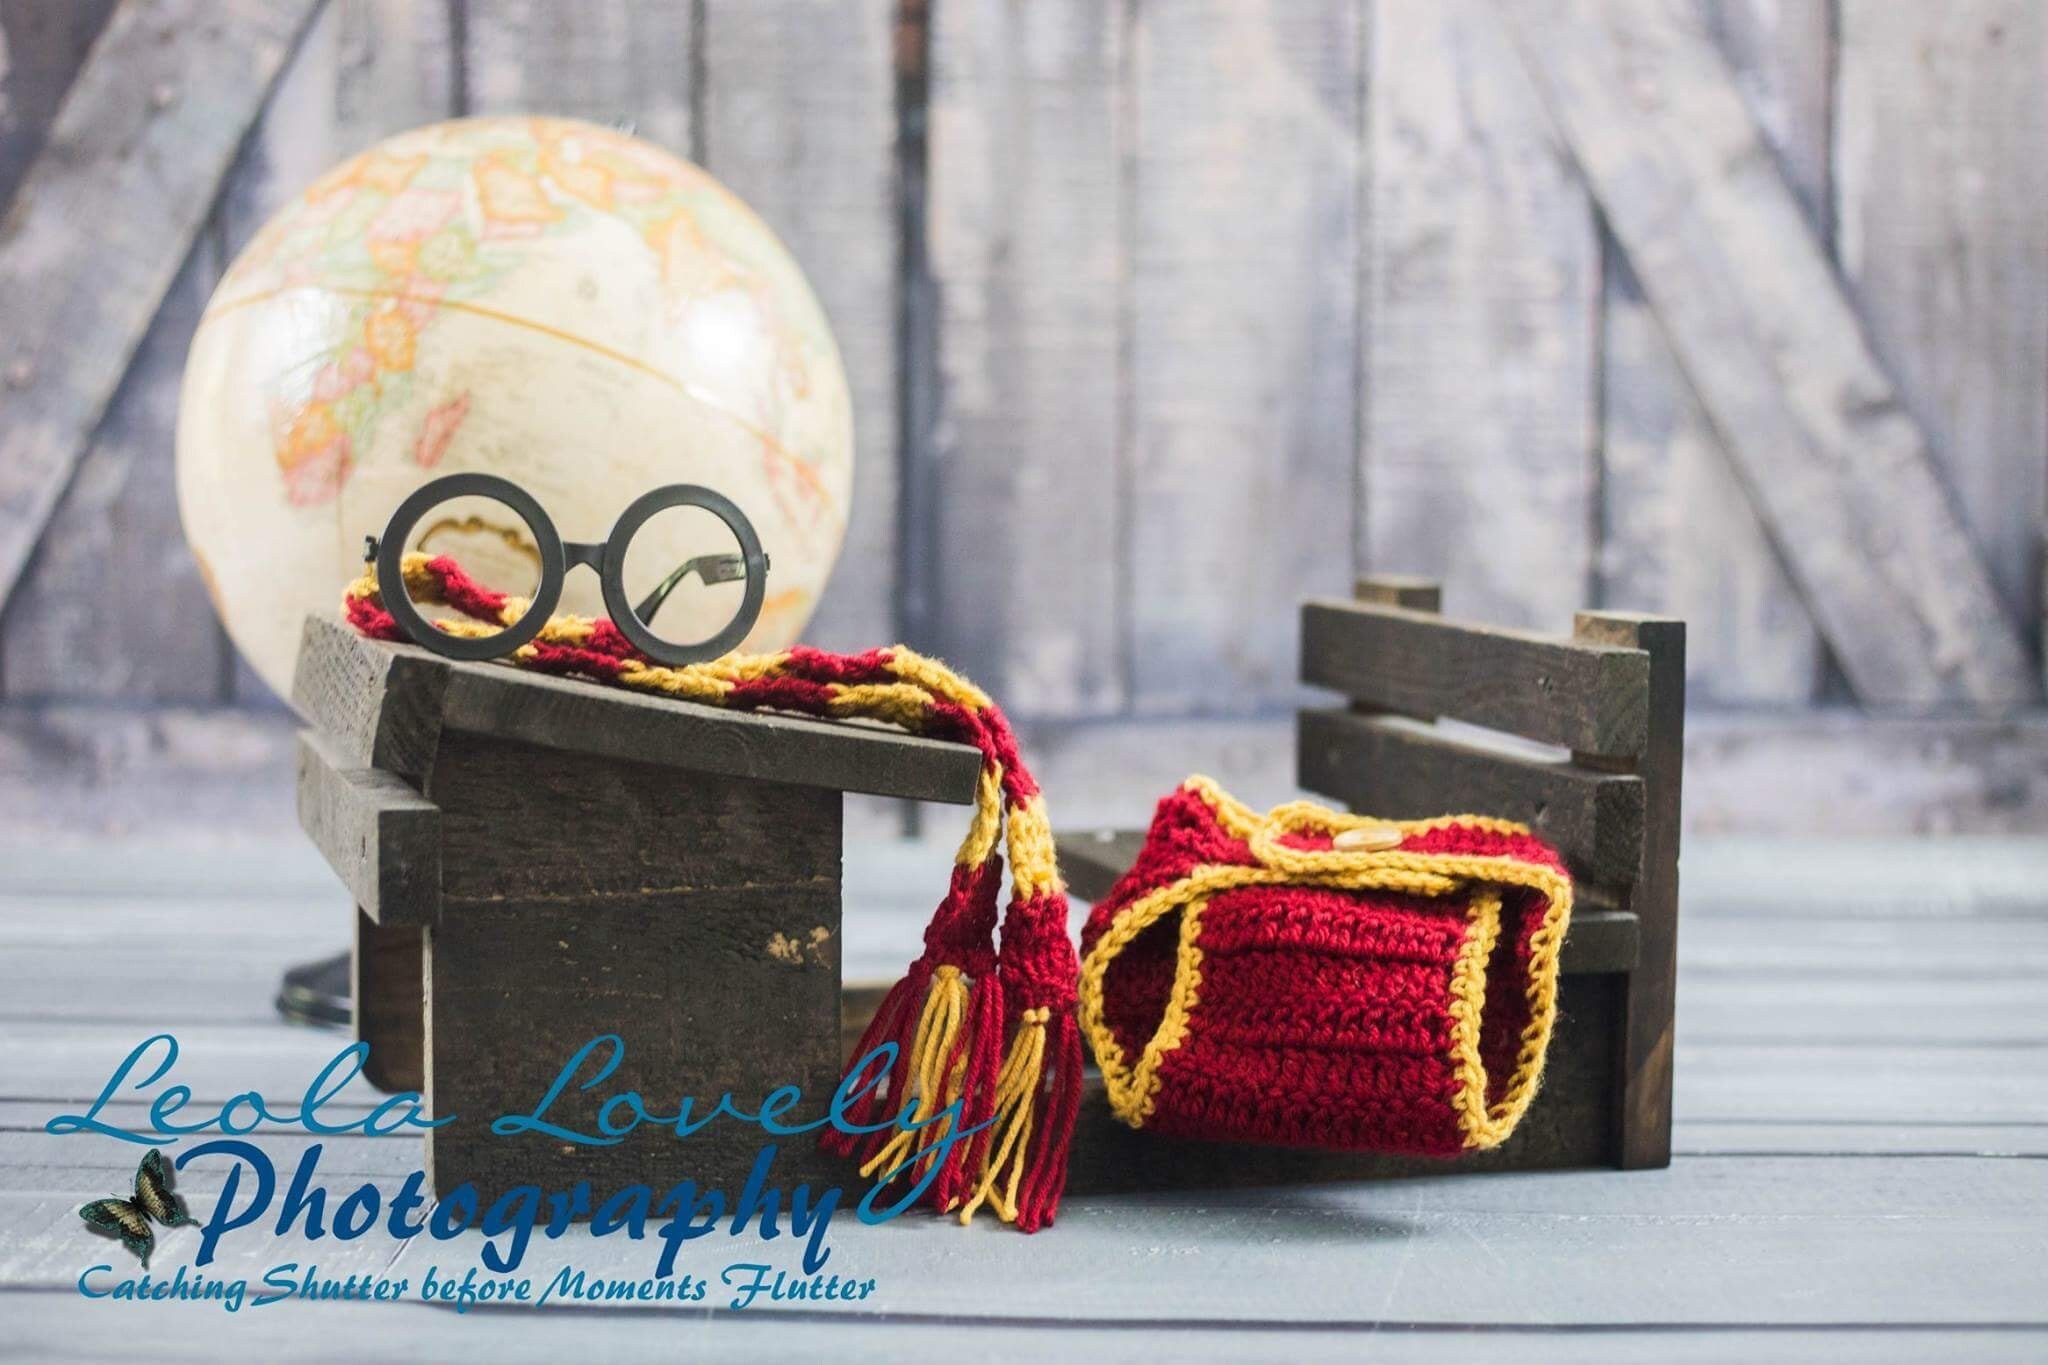 Hedwig Harry Potter Owl Gryffindor Inspired Infant Newborn Baby Outfit  Beanie Hat Cocoon Sack Bundle Crochet Photography Photo Prop 